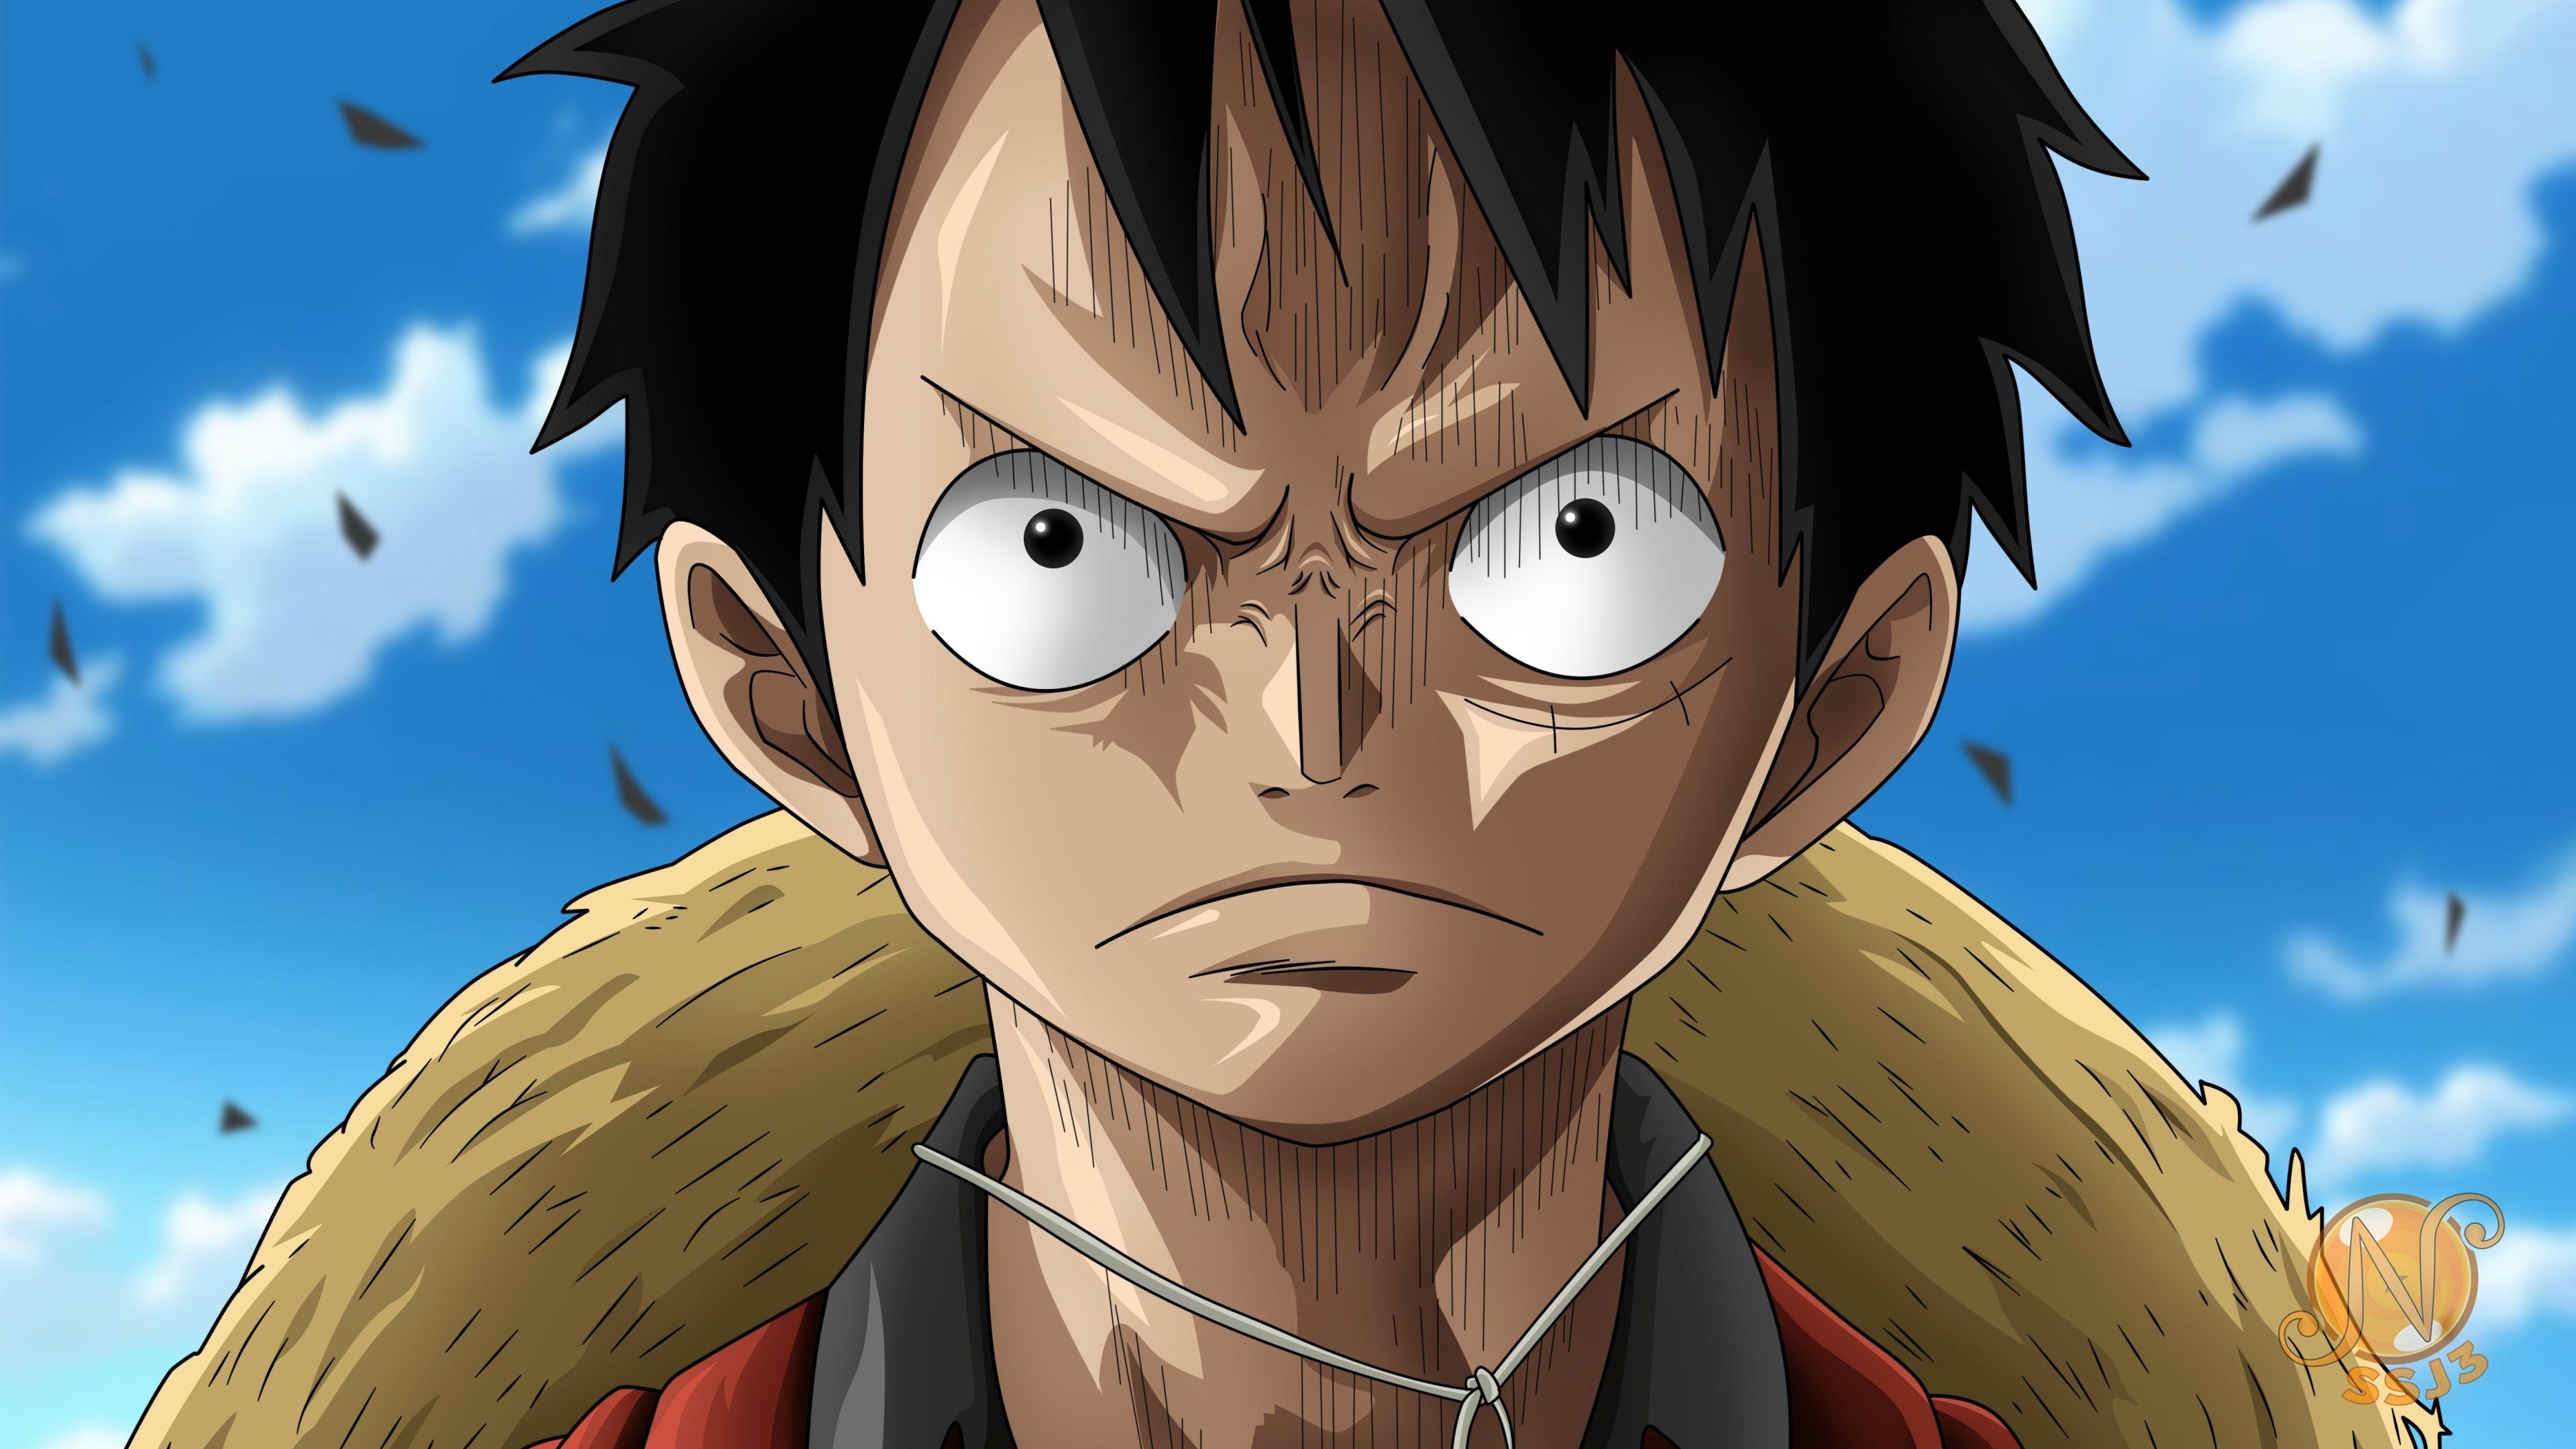 Luffy 4k Wallpapers - Top Free Luffy 4k Backgrounds ...